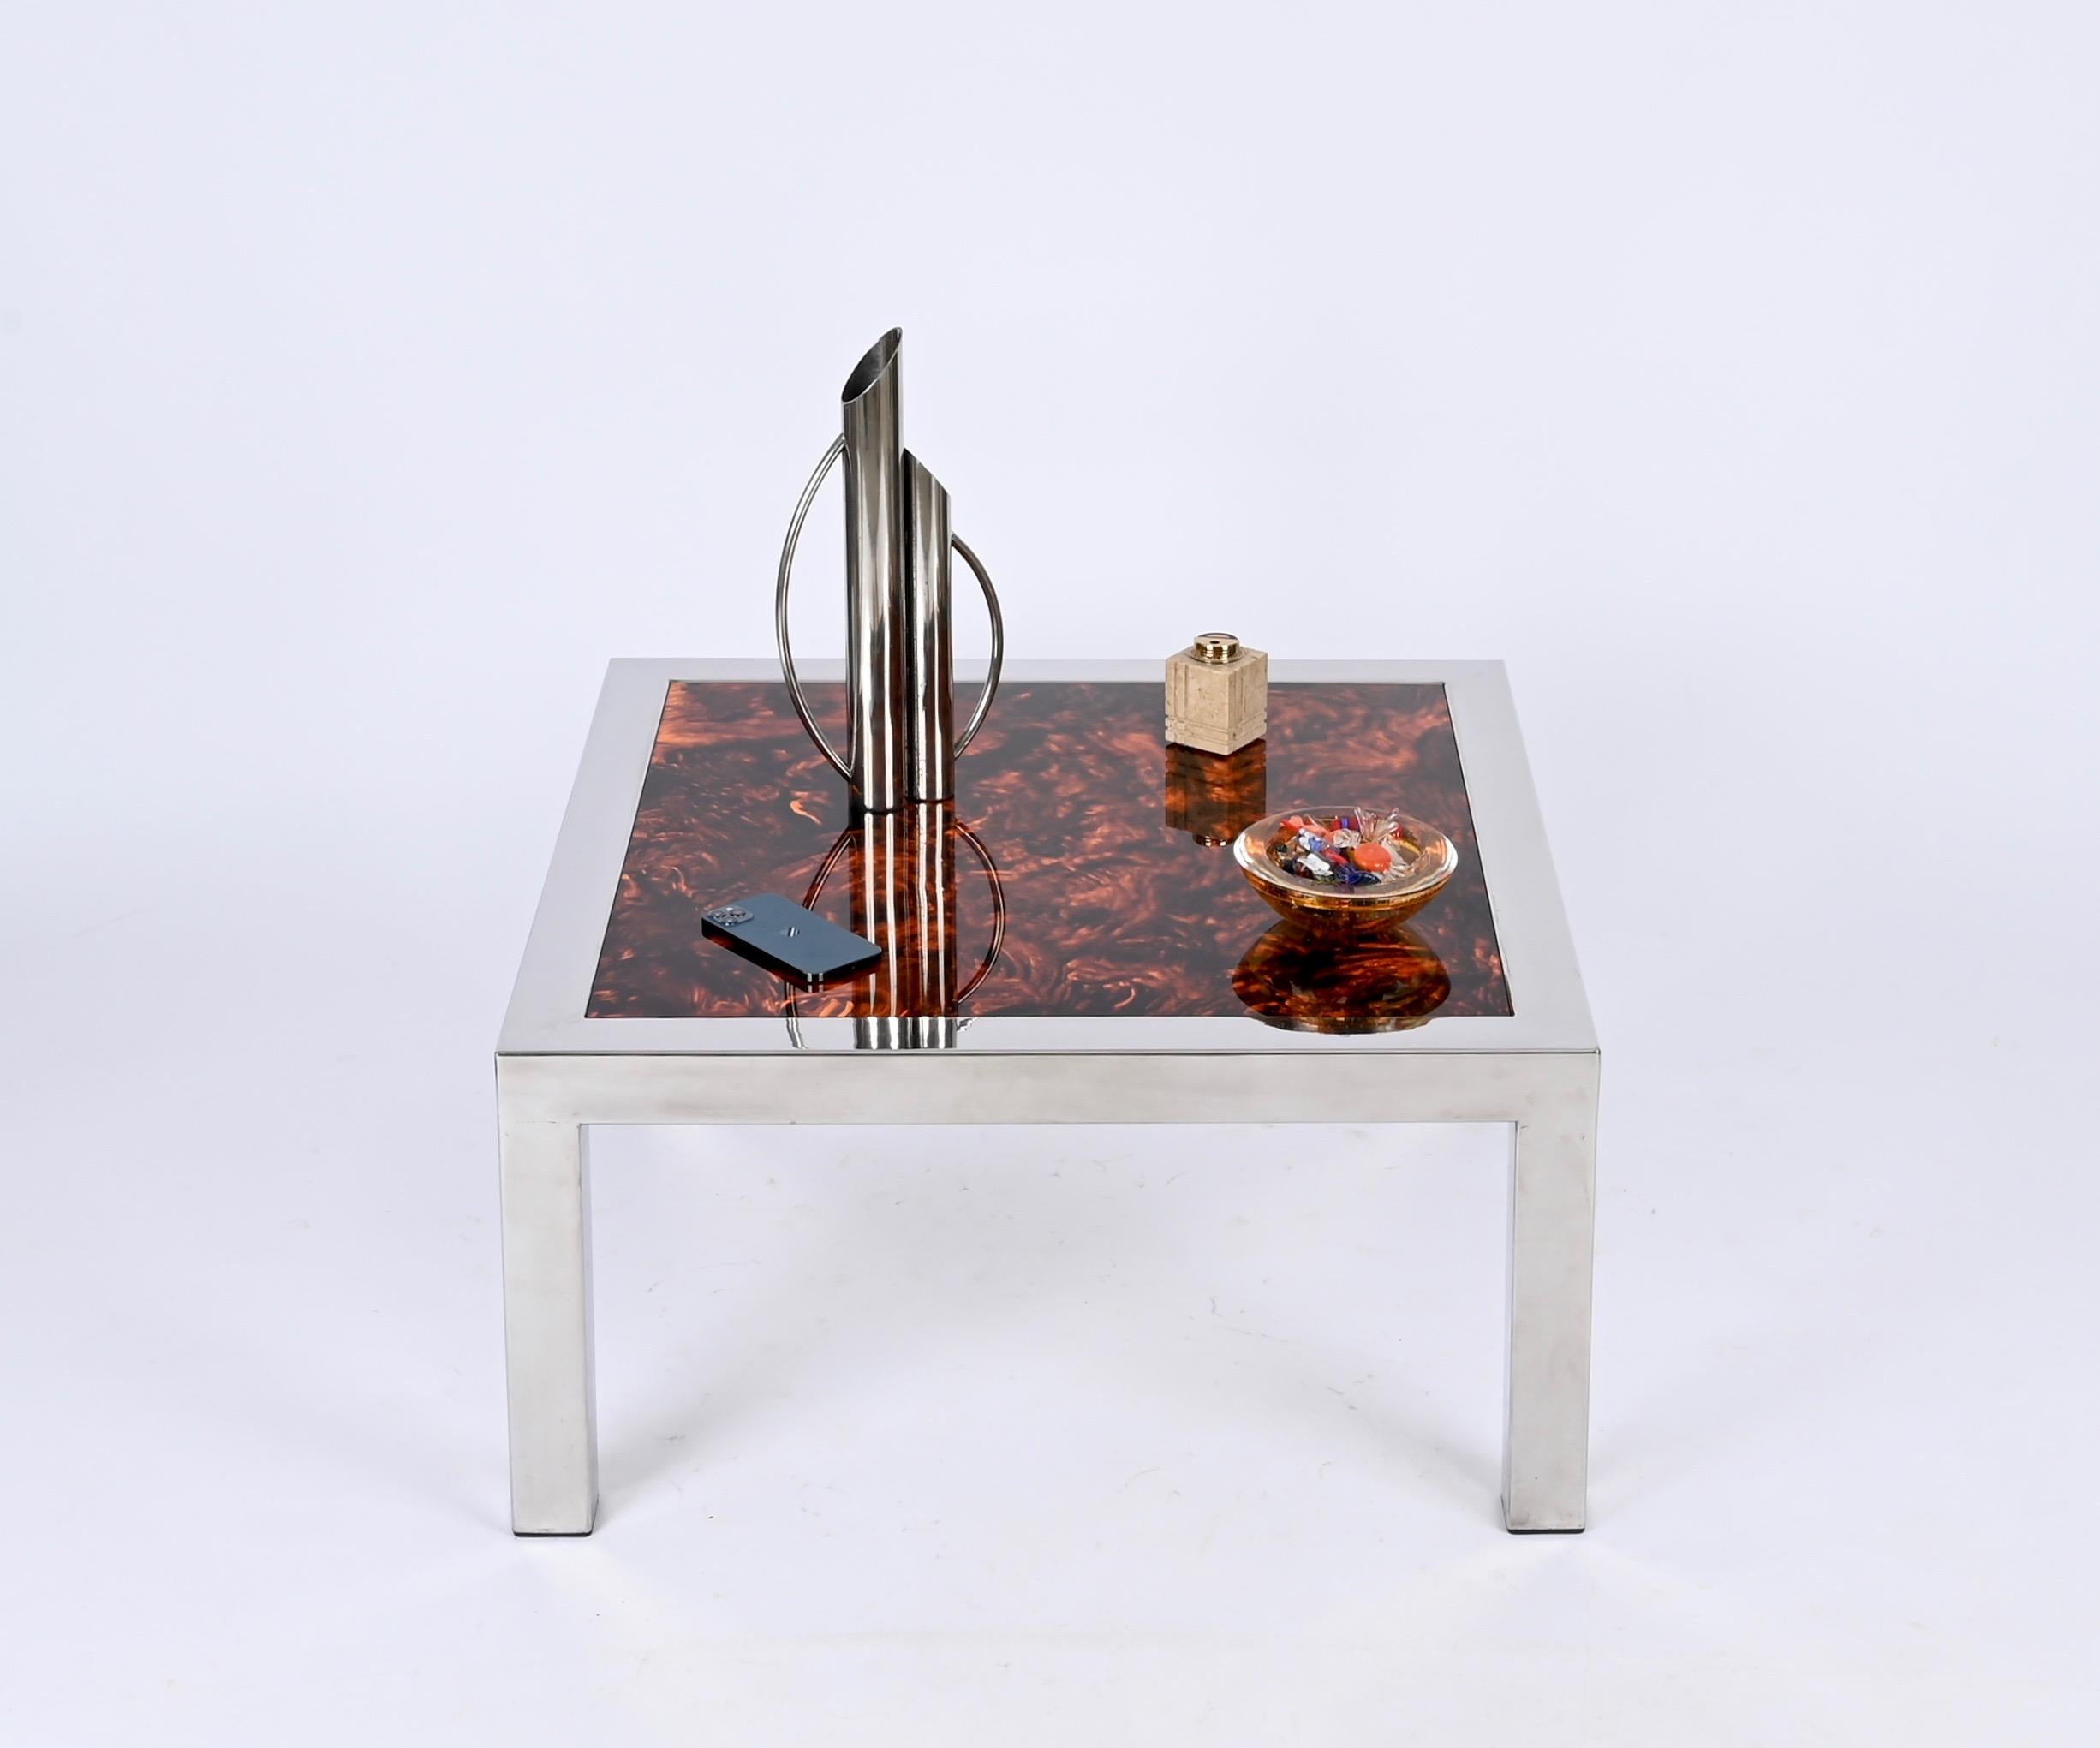 Chromed Steel and Tortoiseshell Effect Lucite Square Coffee Table, Italy 1970s For Sale 2